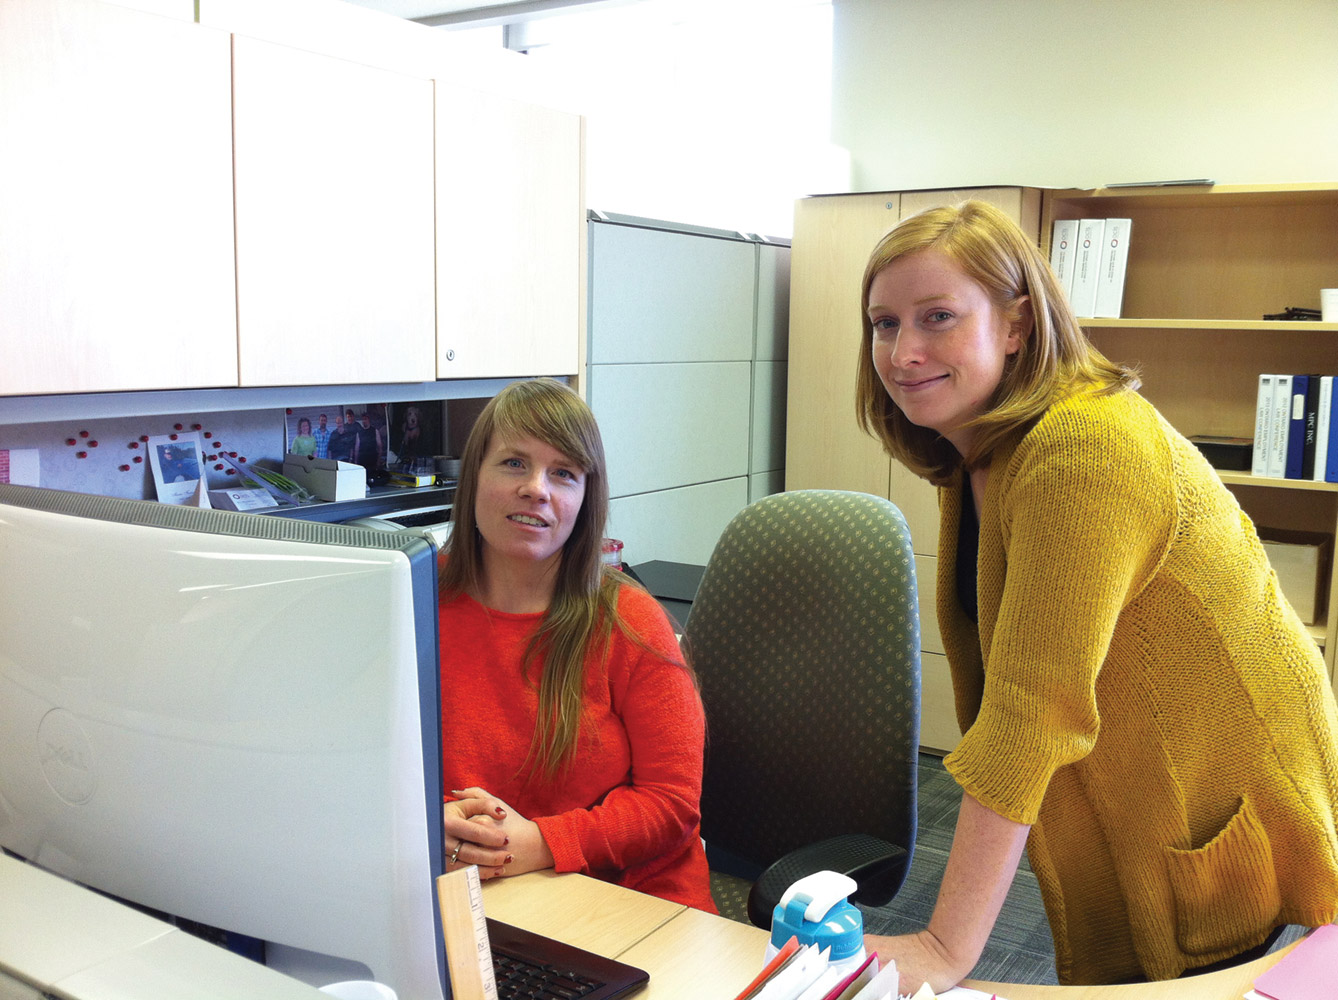 Members of Ontario's Colleges Library Service (OCLS) work using their O3 online collaboration portal.